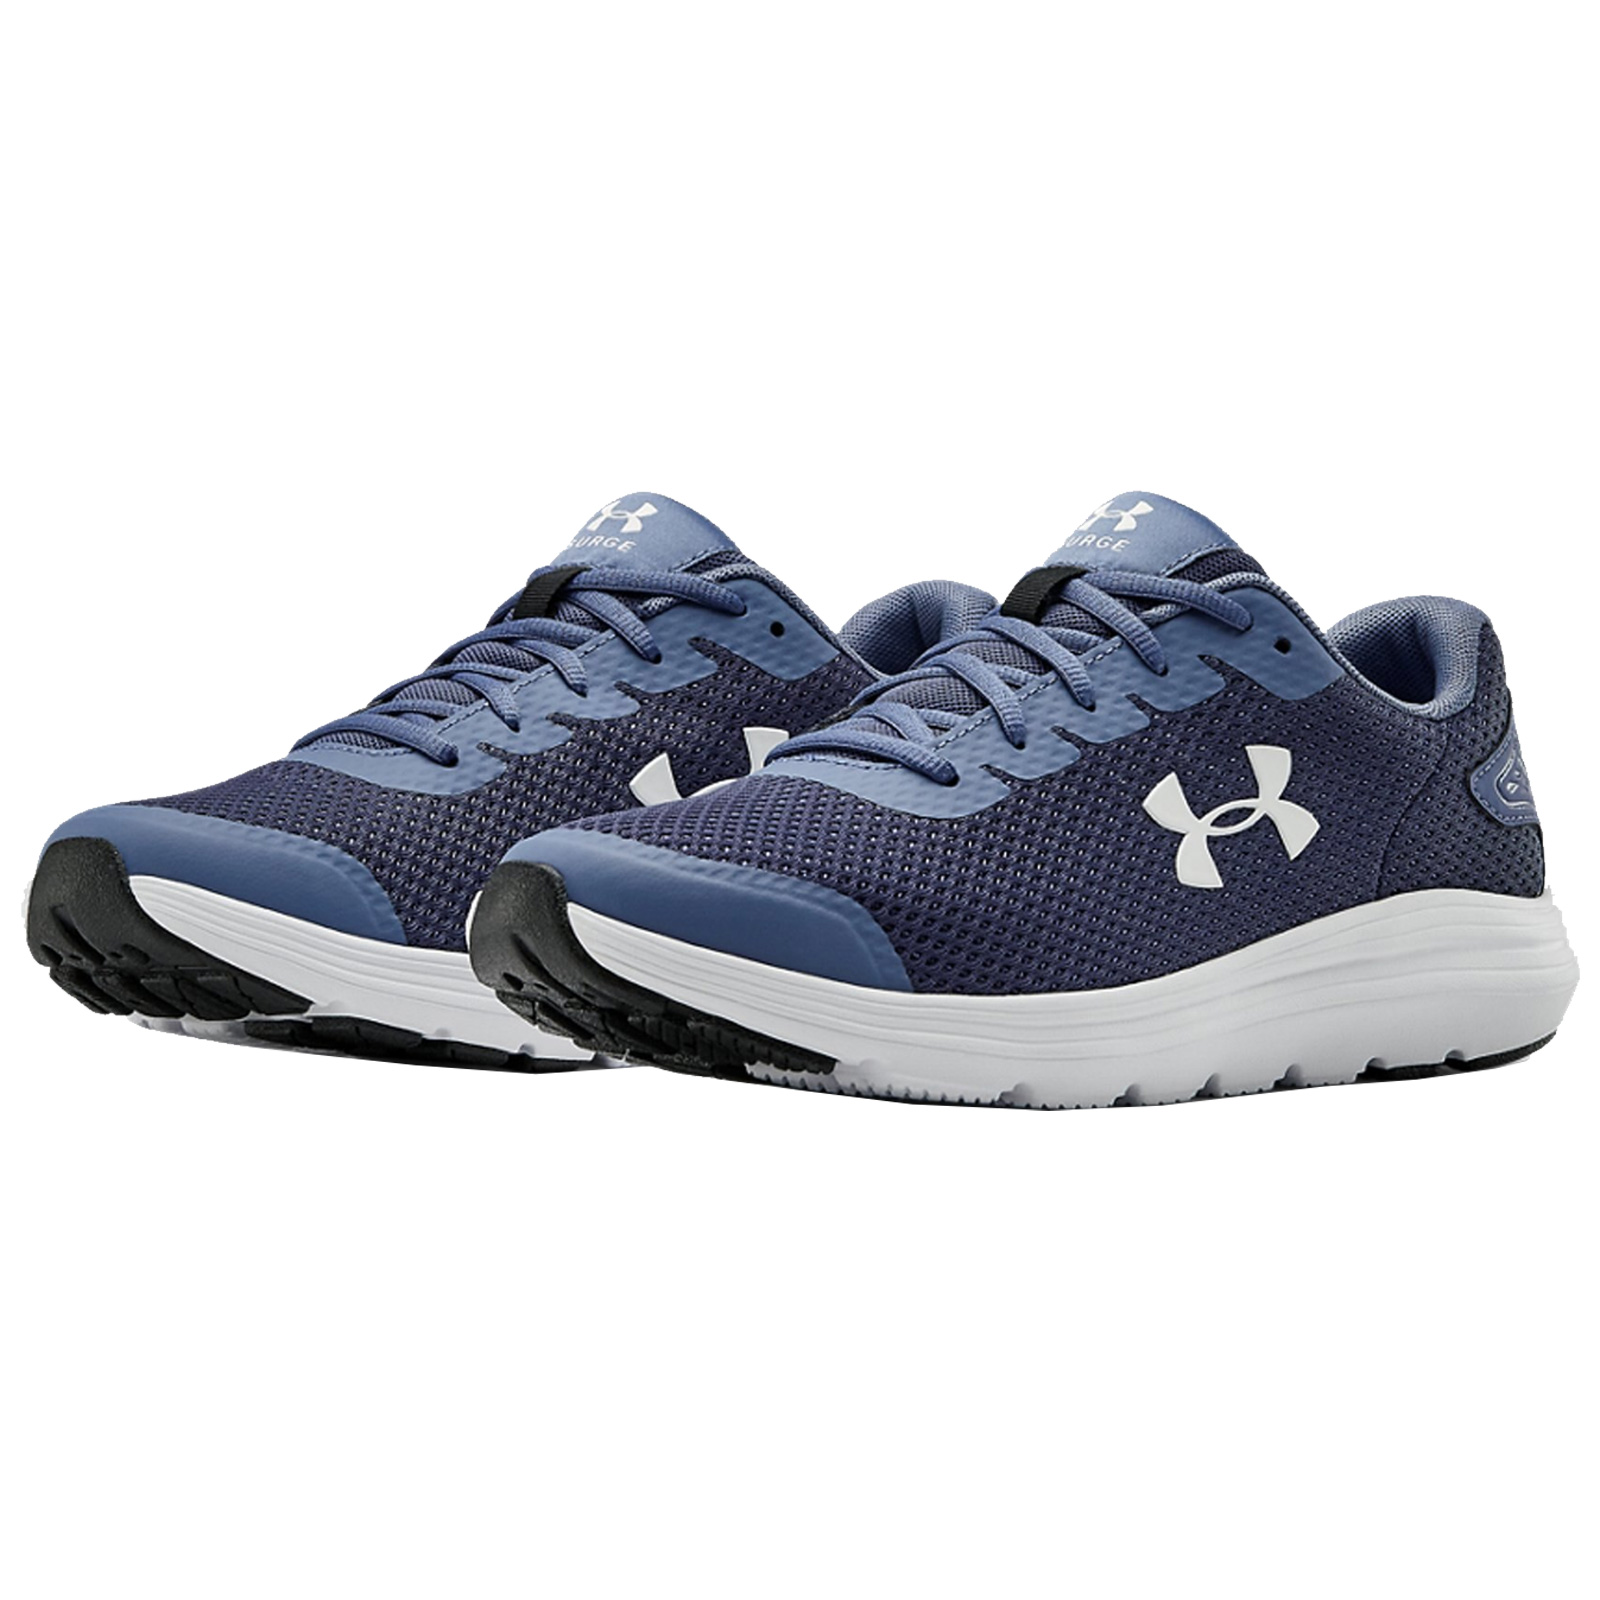 2020 Under Armour Mens Surge 2 Trainers UA Gym Running Shoes Walking ...